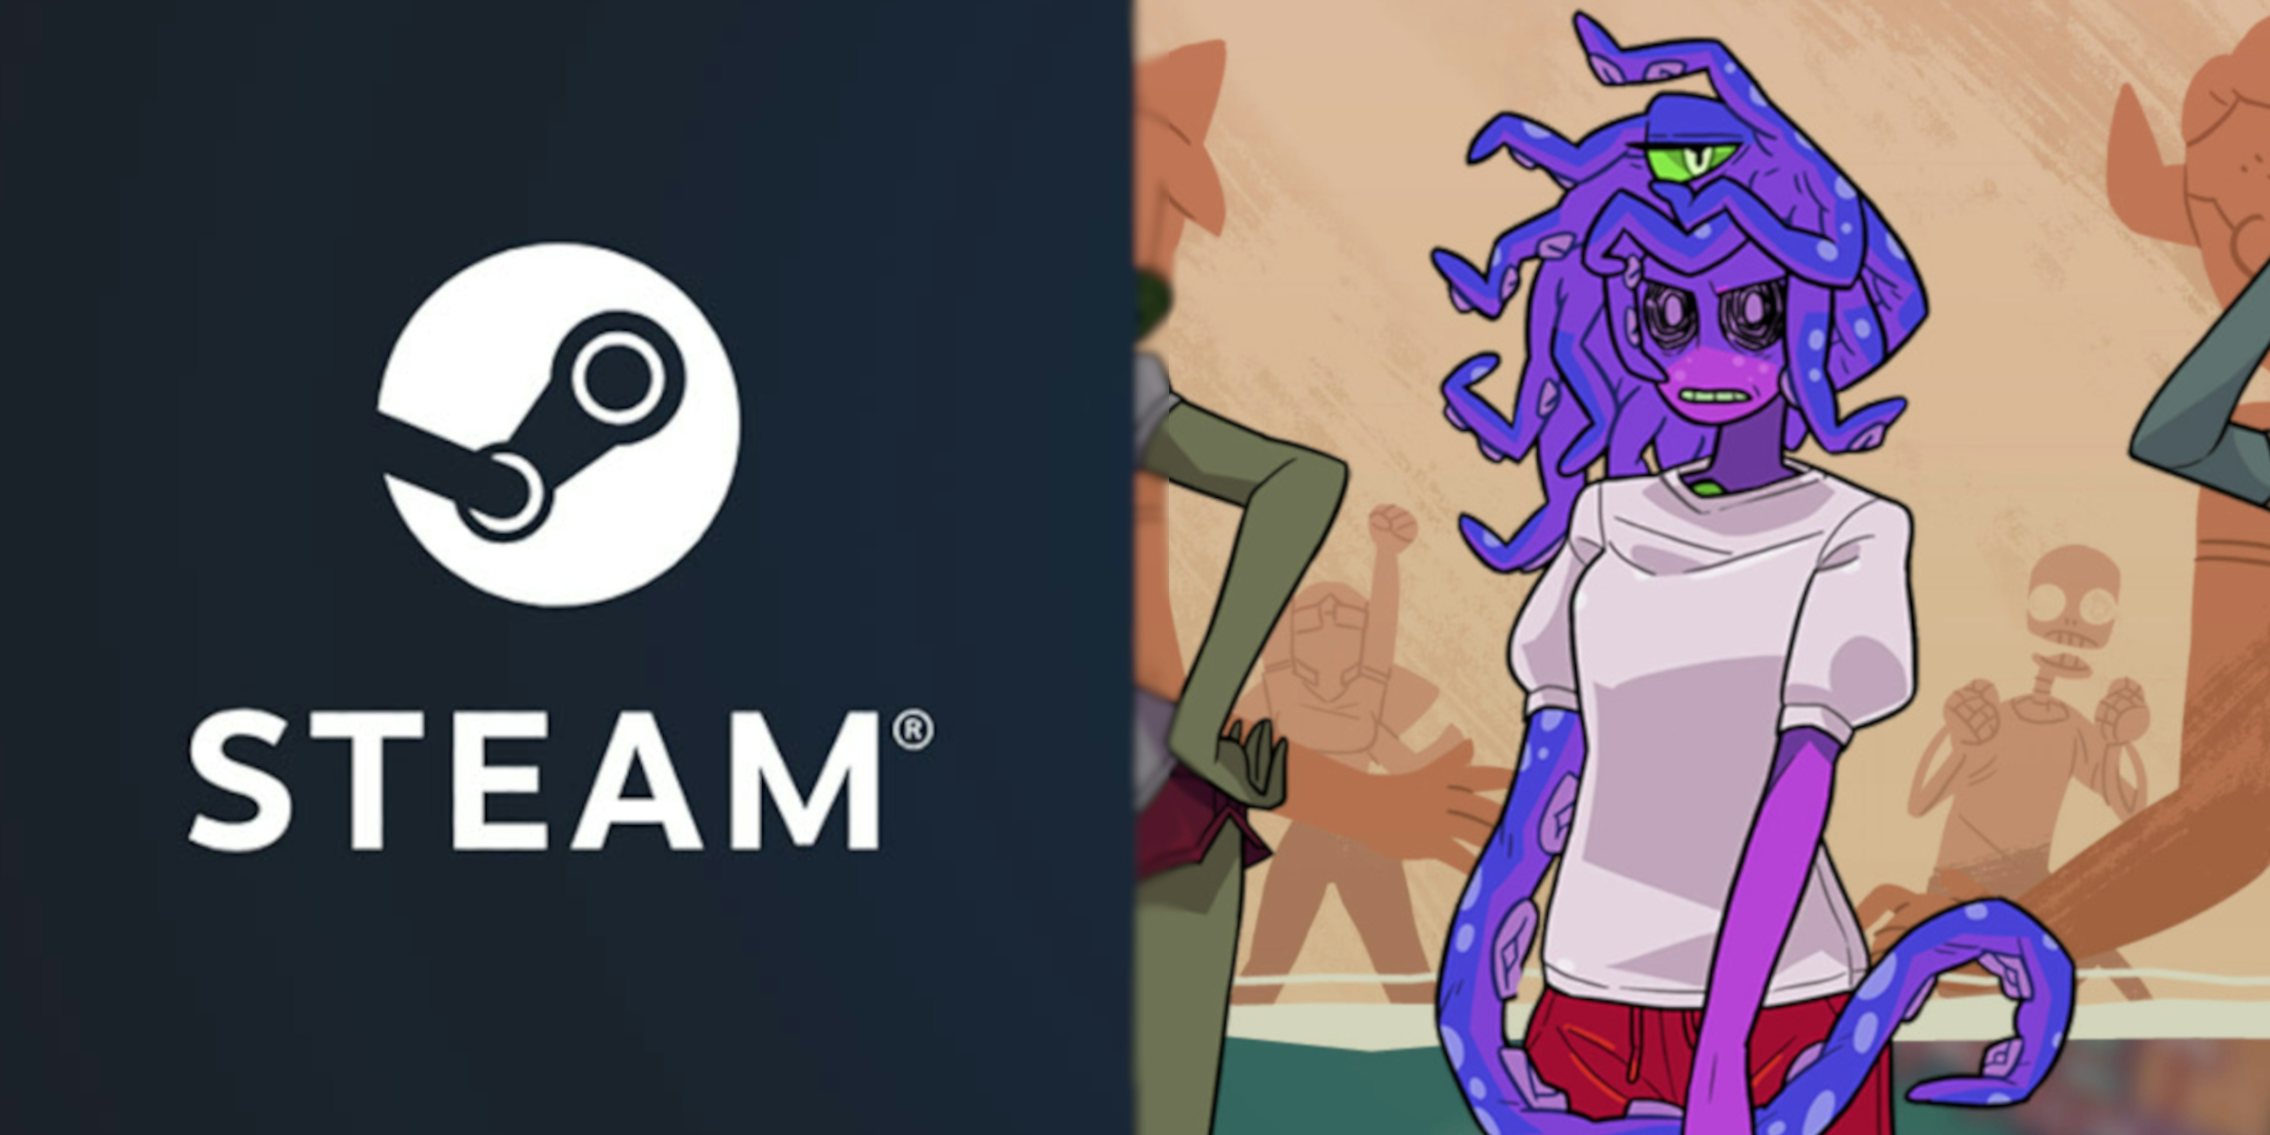 A side by side comparison of the Steam logo and Zoe from Monster Prom, a popular LGBTQ game.